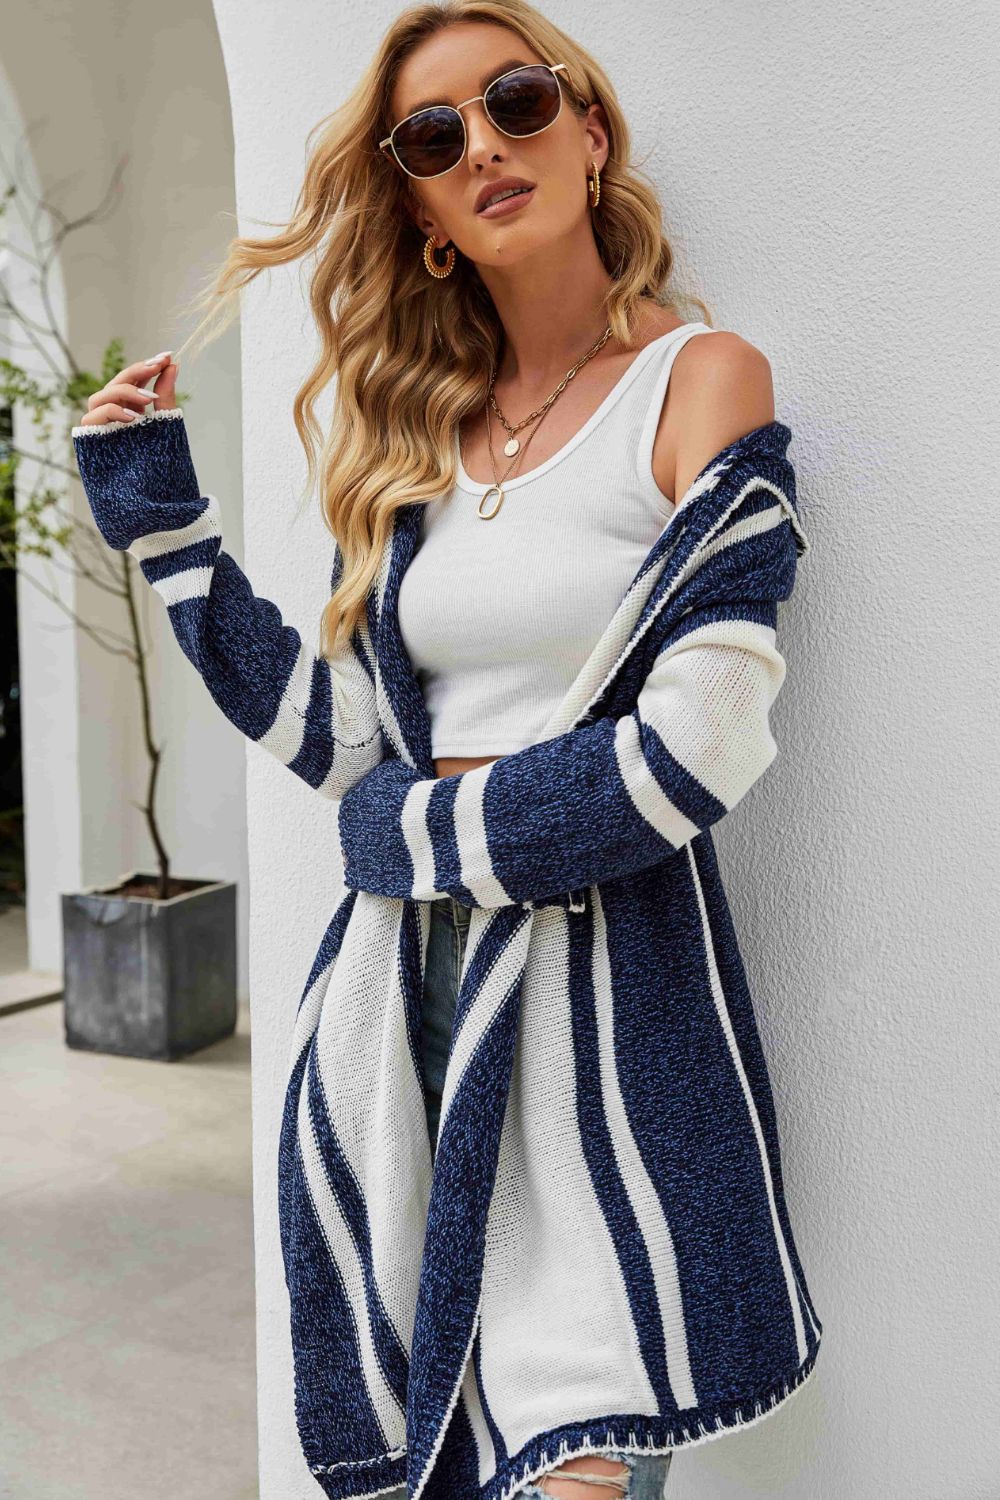 Long Hooded Oversized Knit Cardigan Handkerchief Shrug (2 colors available)